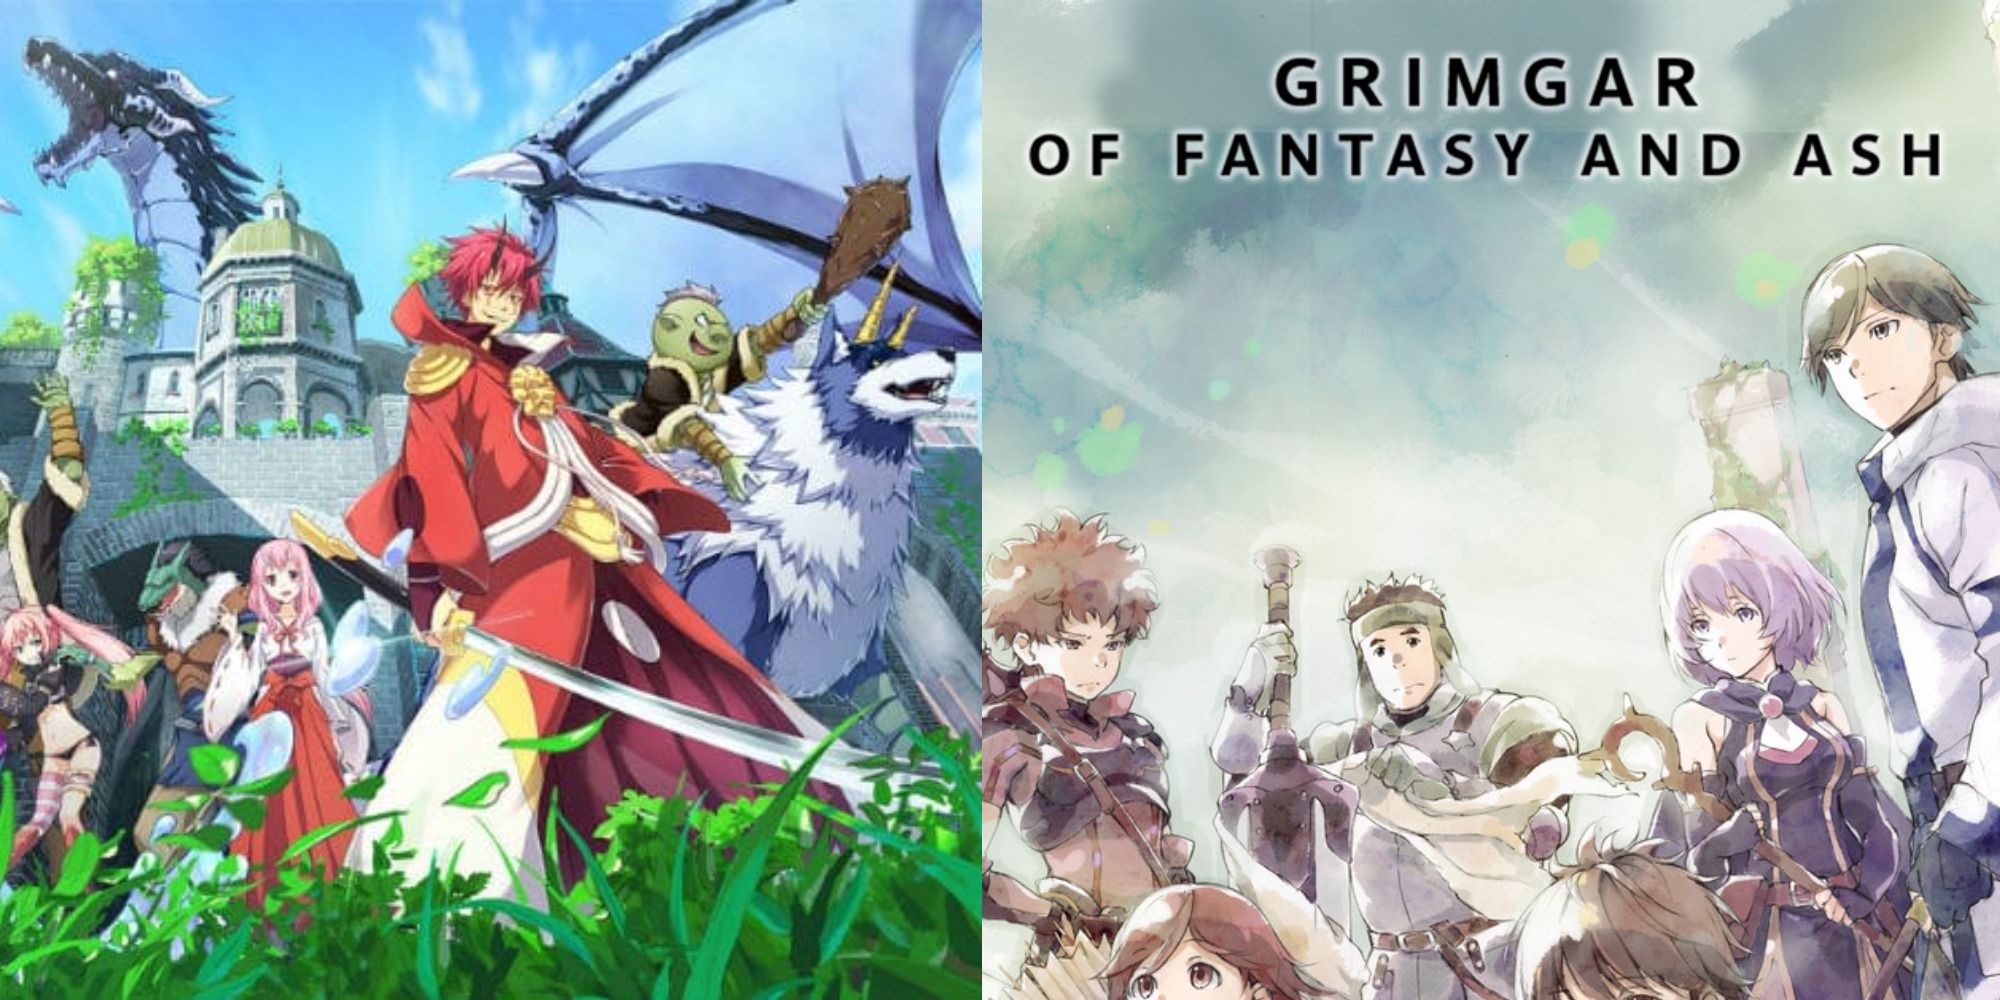 Looking For a Genshin Impact Anime? Here Are Our Top Suggestions.